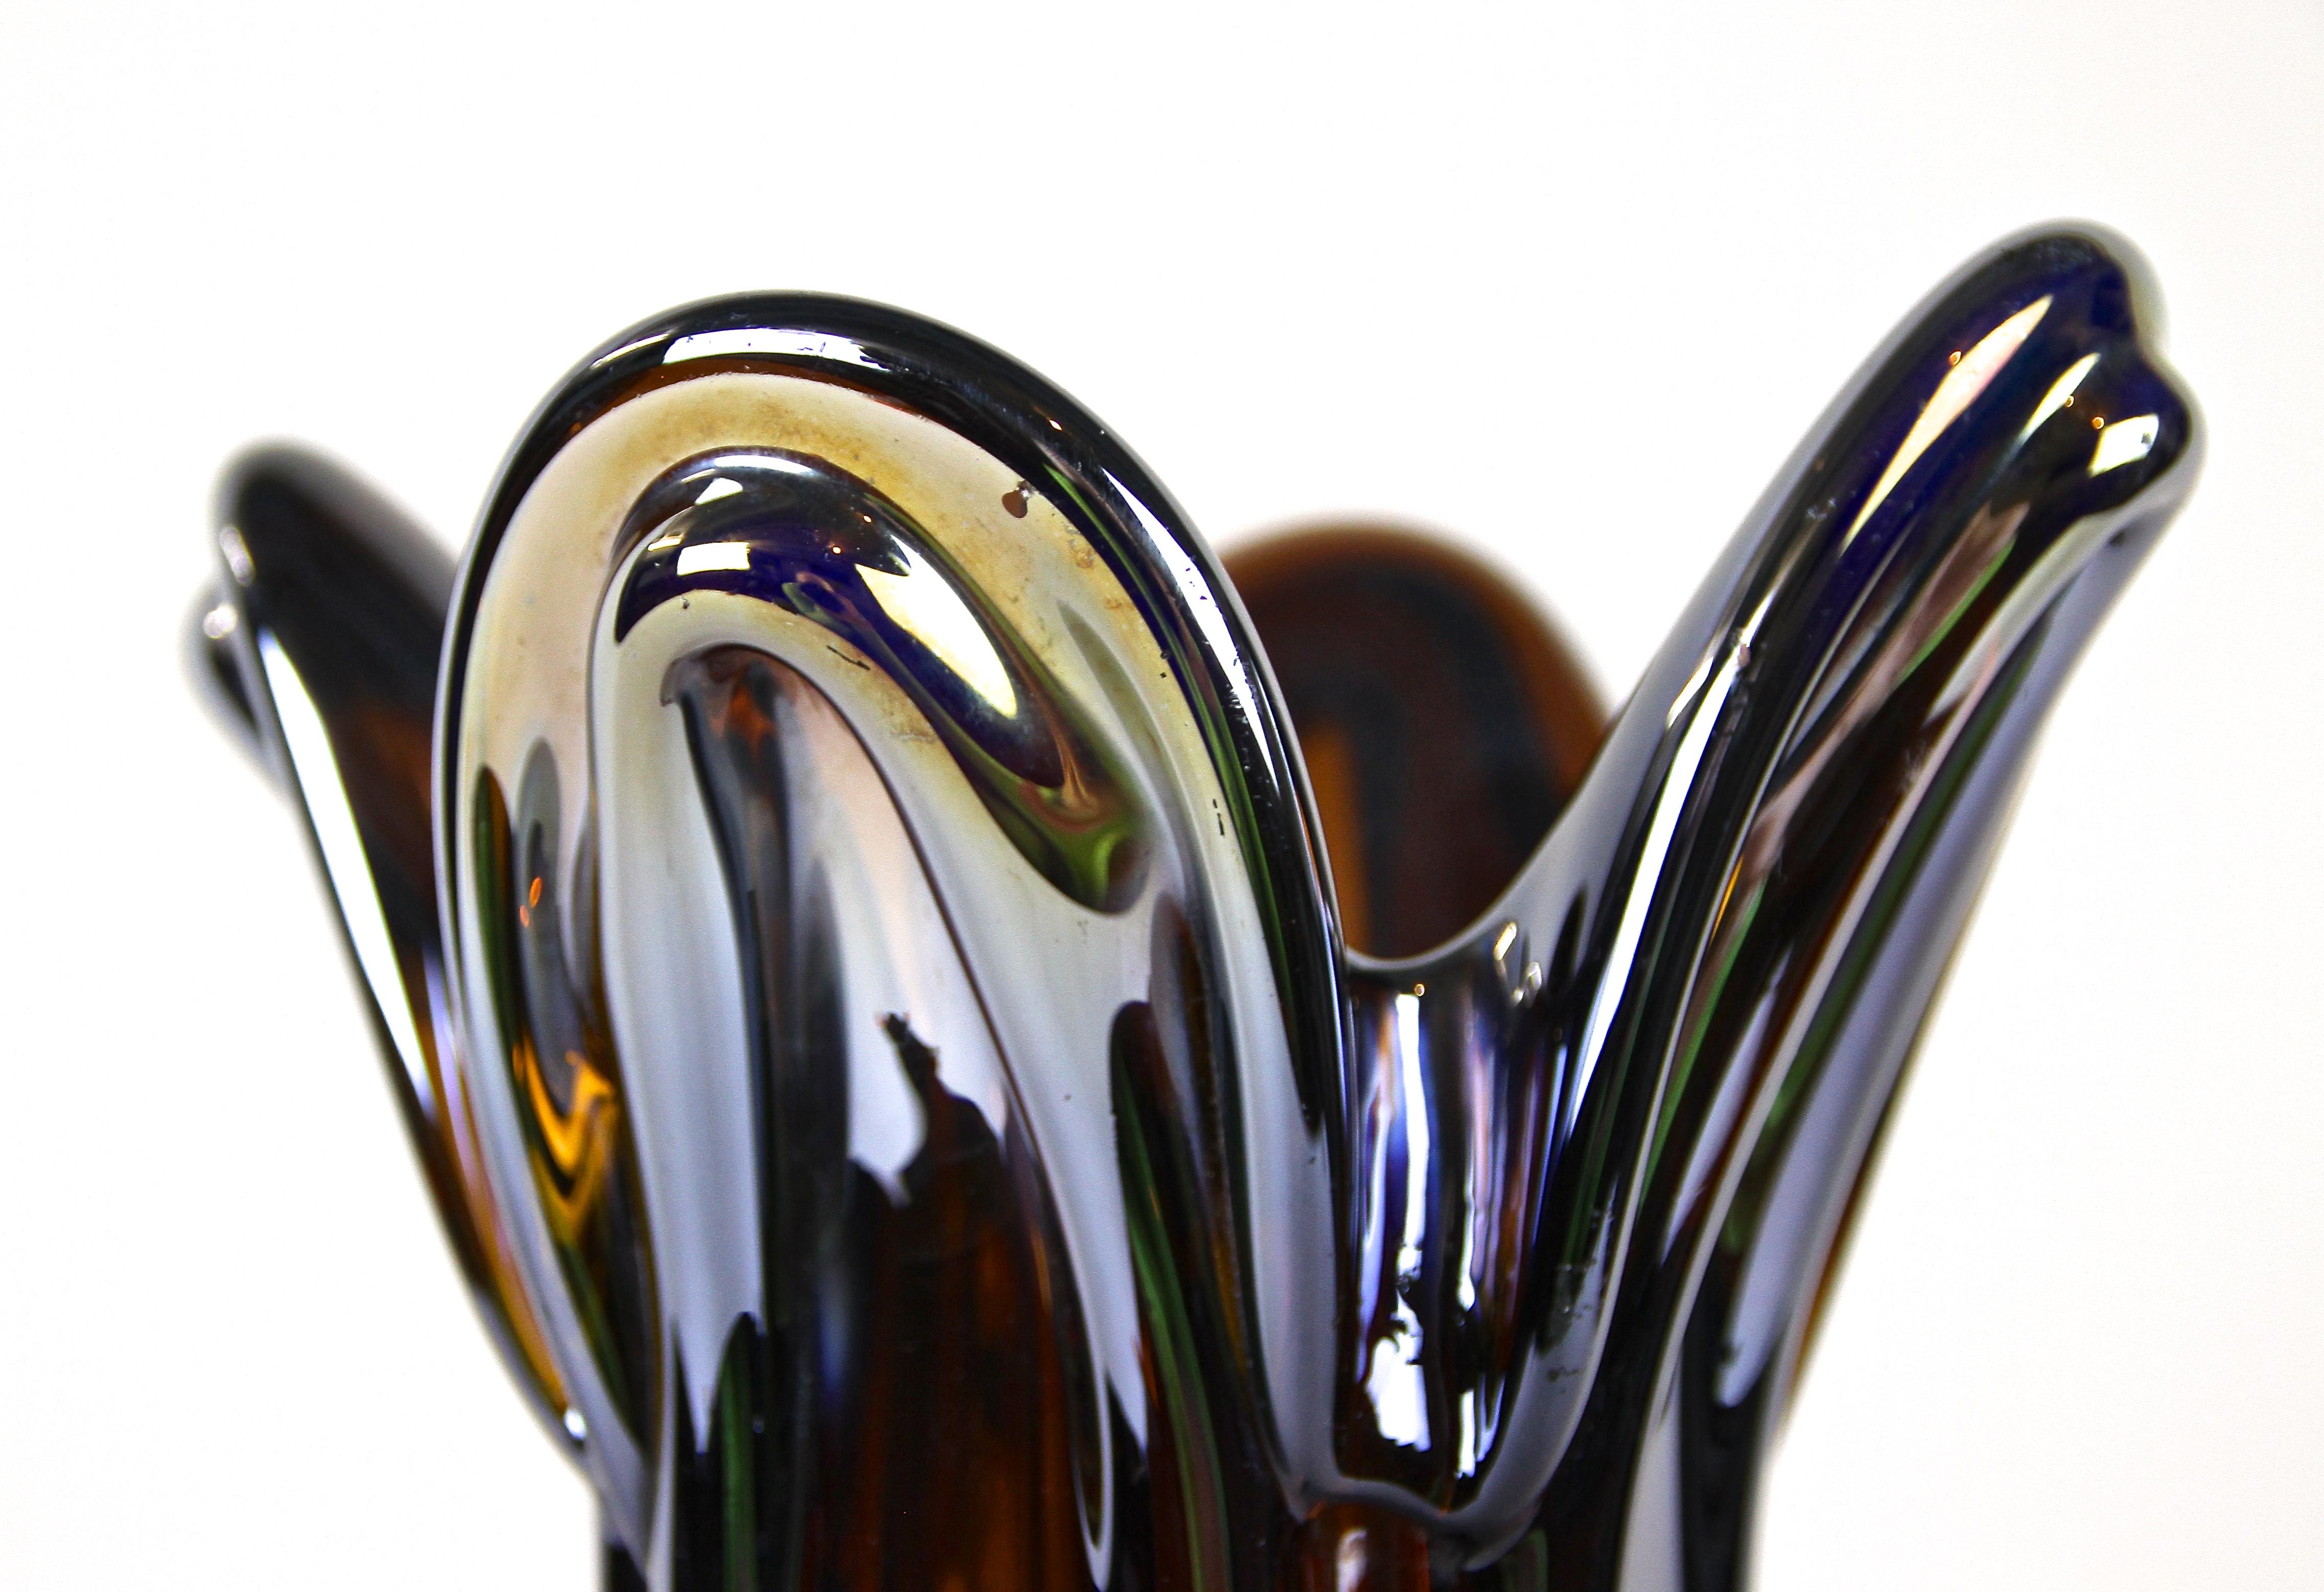 20th Century Iridiscent Murano Glass Vase Amber Colored with Chrome Effect, Italy circa 1970 For Sale